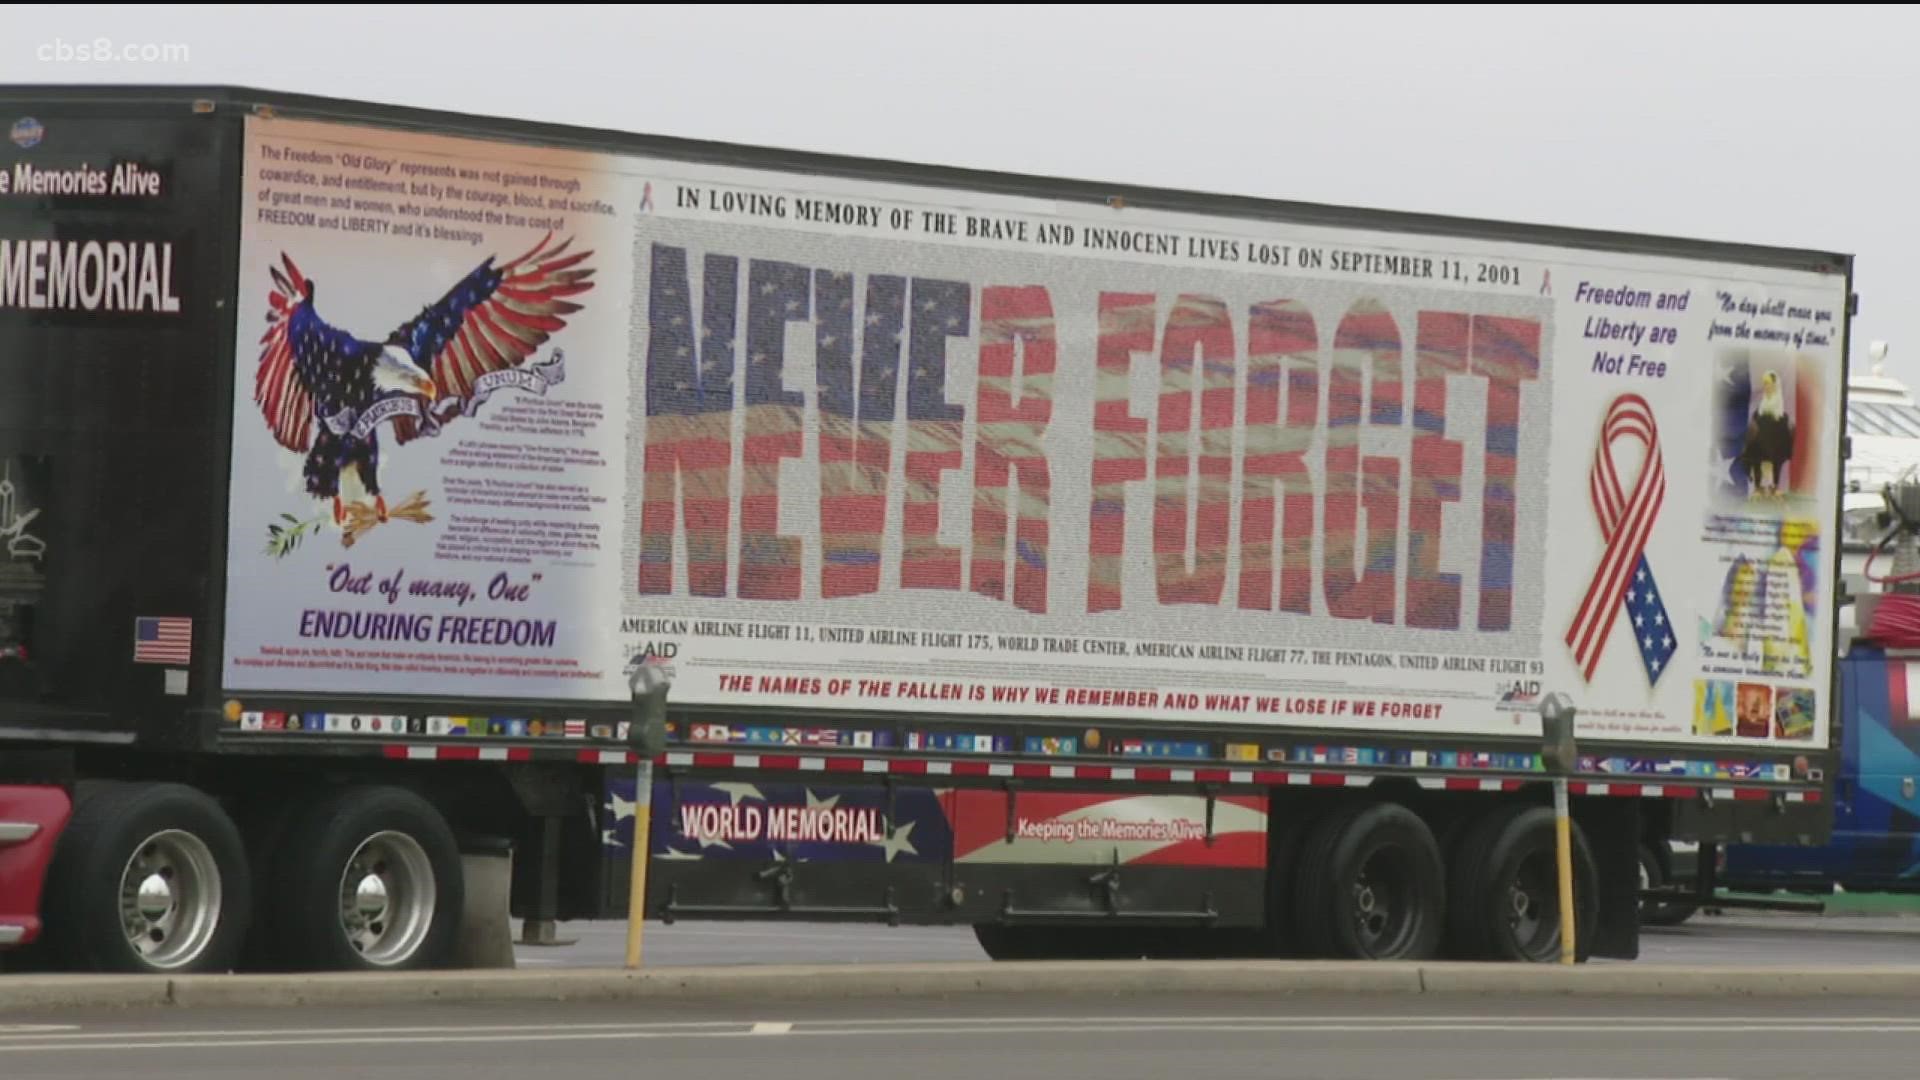 All of the names of the fallen are emblazed on two murals on the sides of the semitrailer.